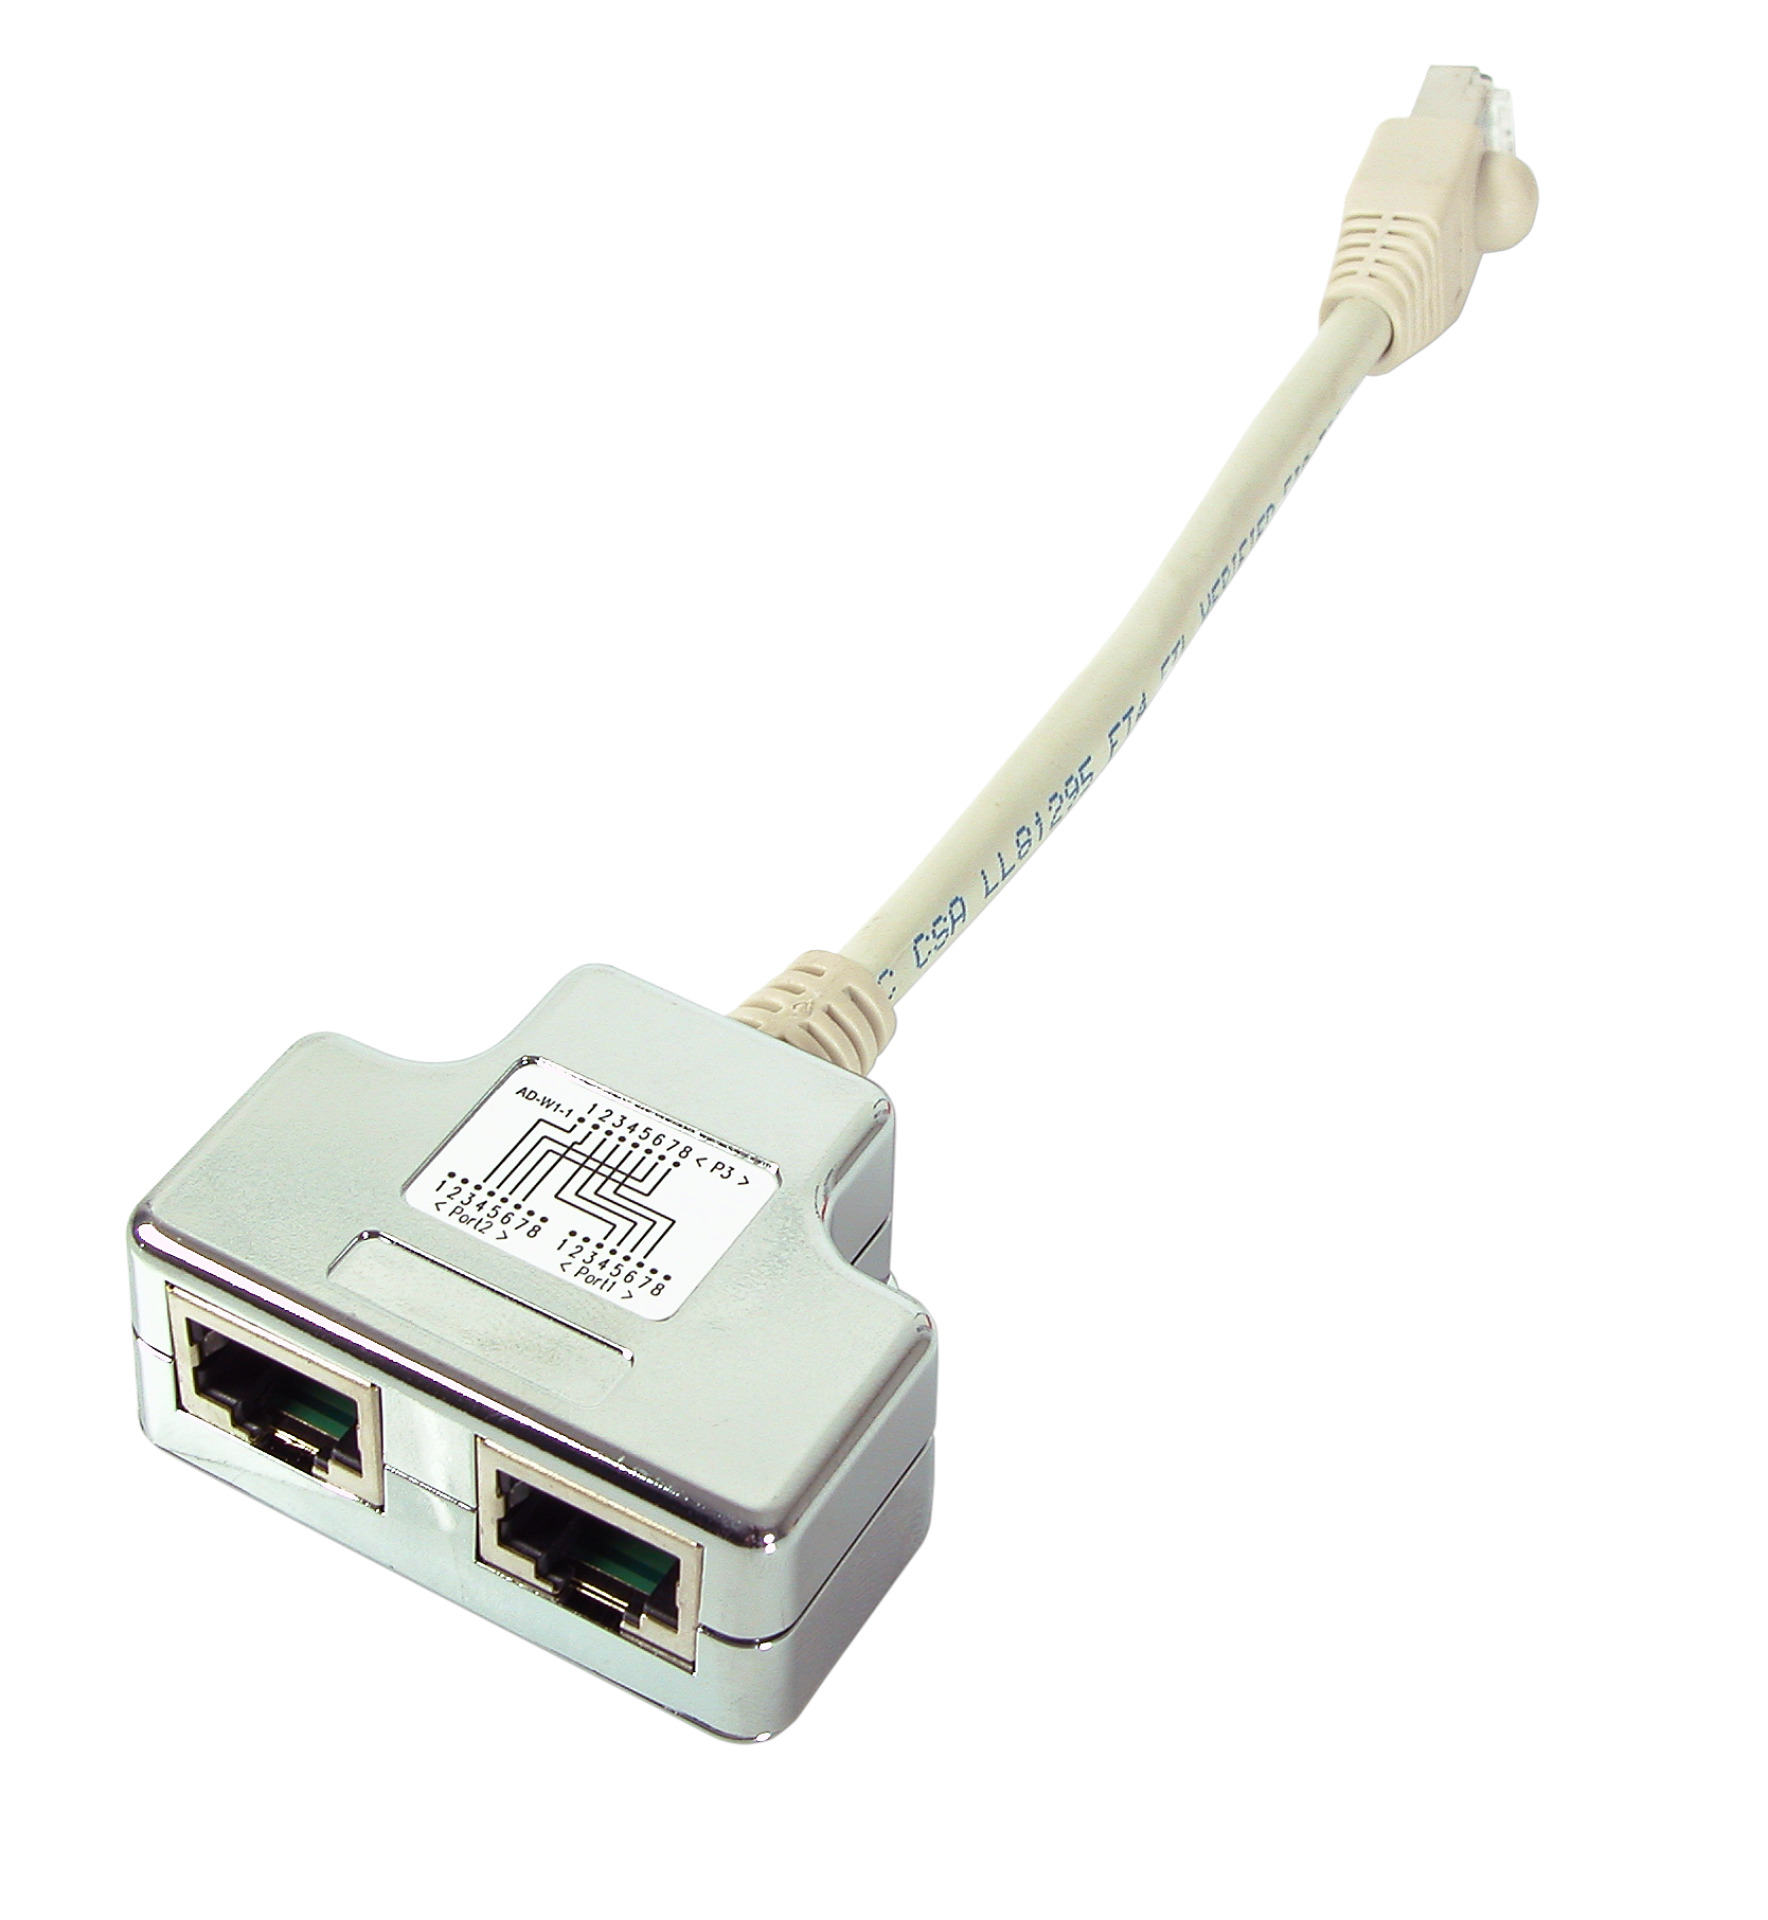 T-Adapter 2 x ISDN for Cable Sharing